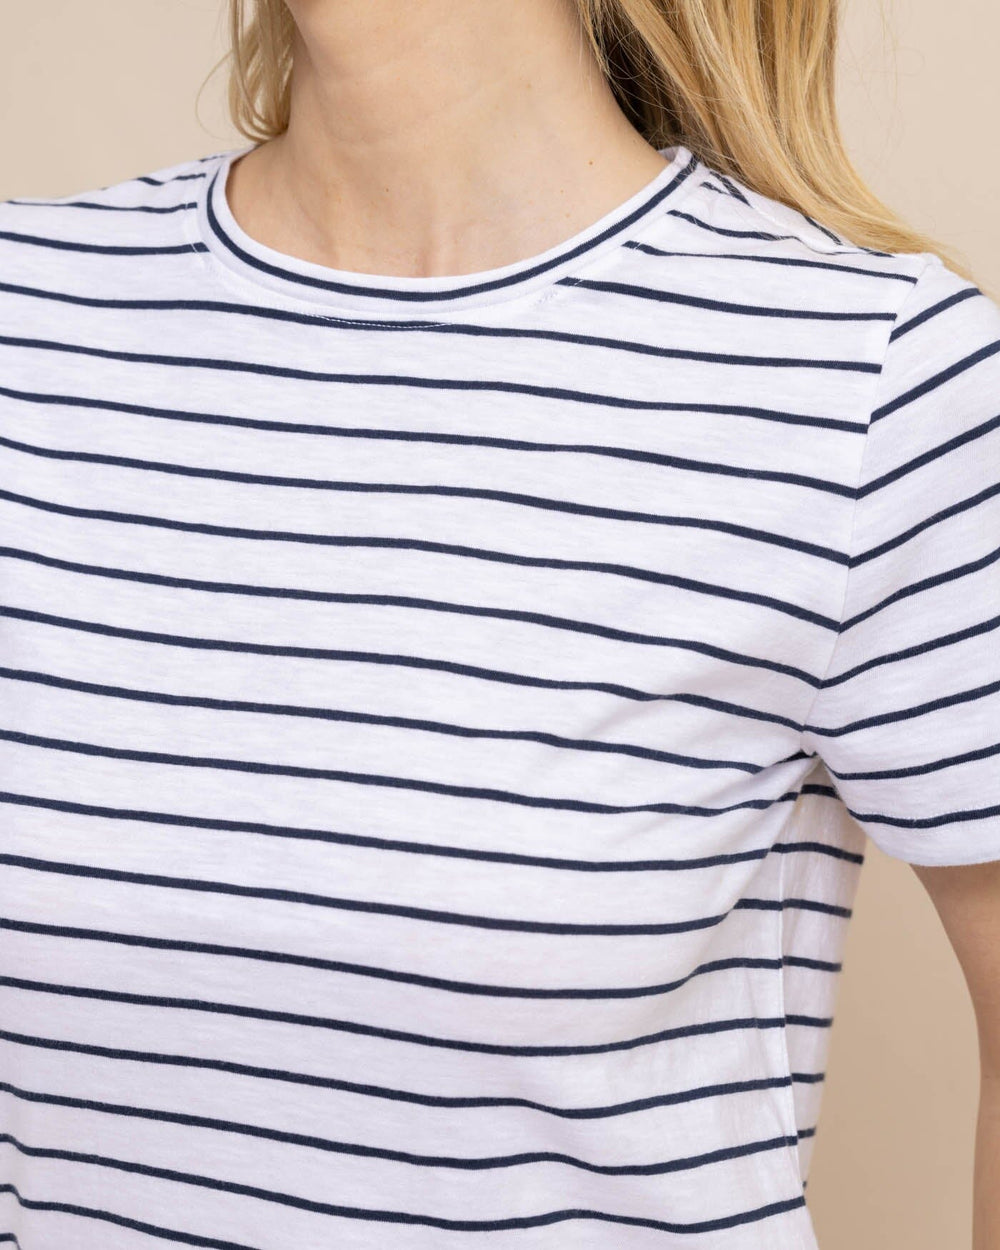 The detail view of the Southern Tide Sun Farer Stripe Crew Neck T-Shirt by Southern Tide - Dress Blue